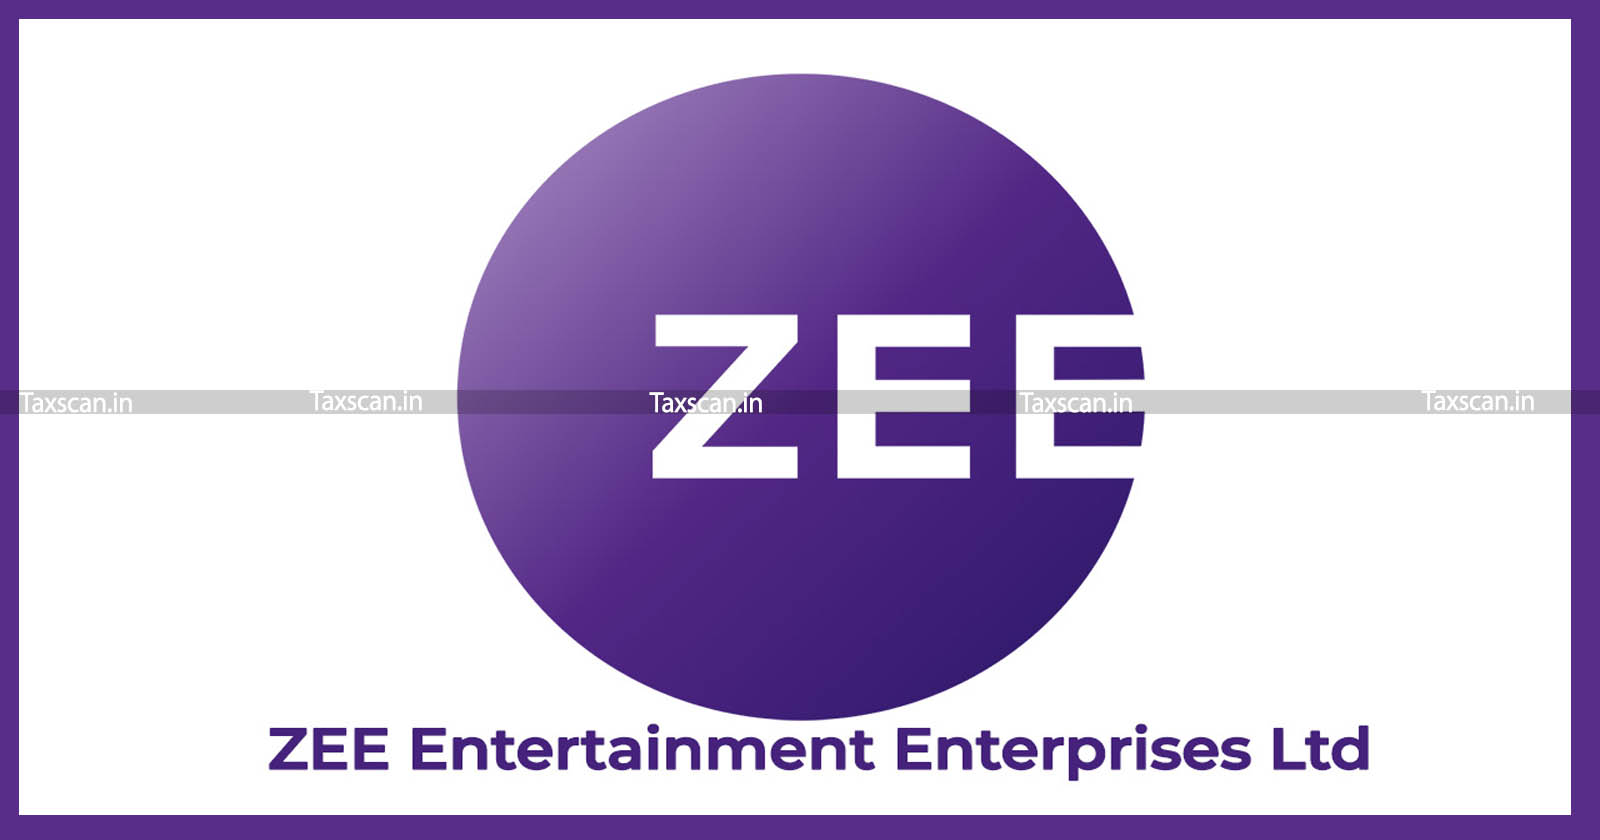 MCA - ZEE Entertainment - allegations of Syphoning Funds - Syphoning Funds - Bogus Book Entries - SEBI - taxscan